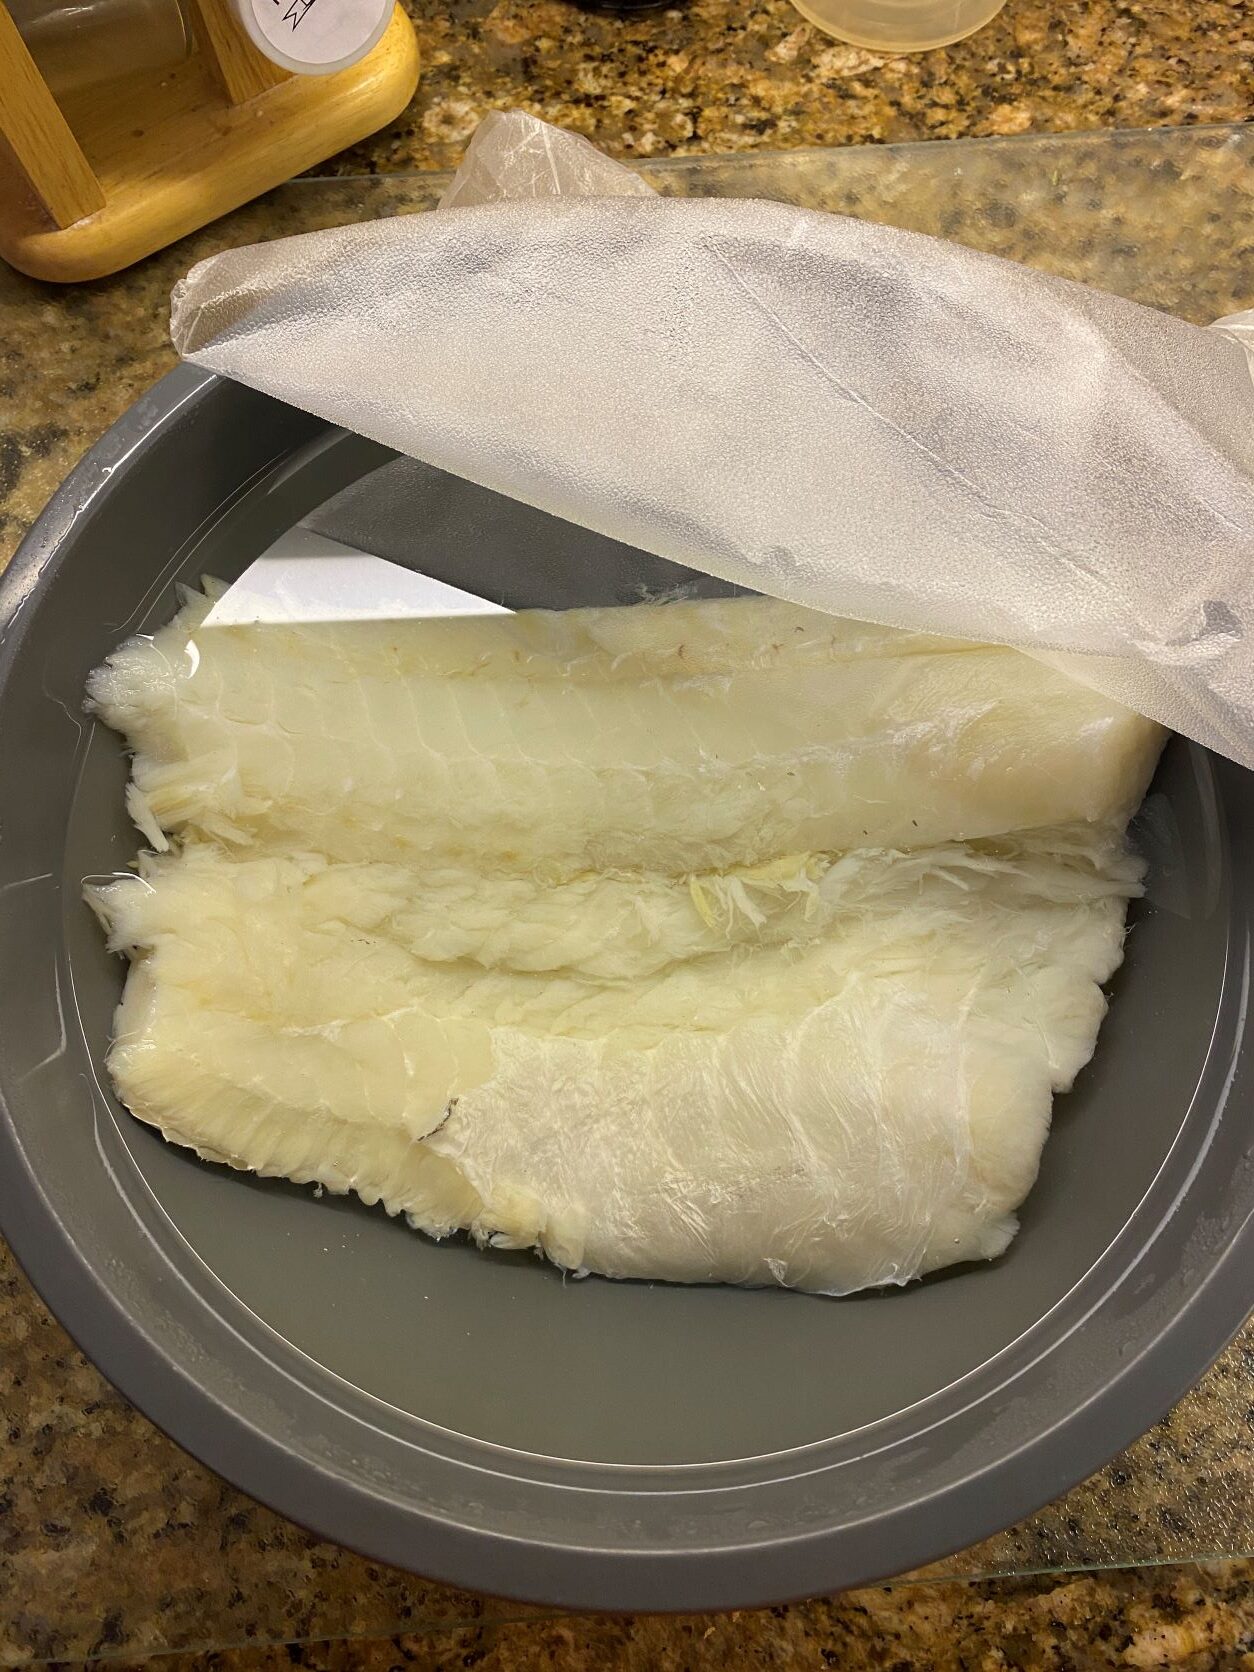 Salted Cod soaking in a bowl